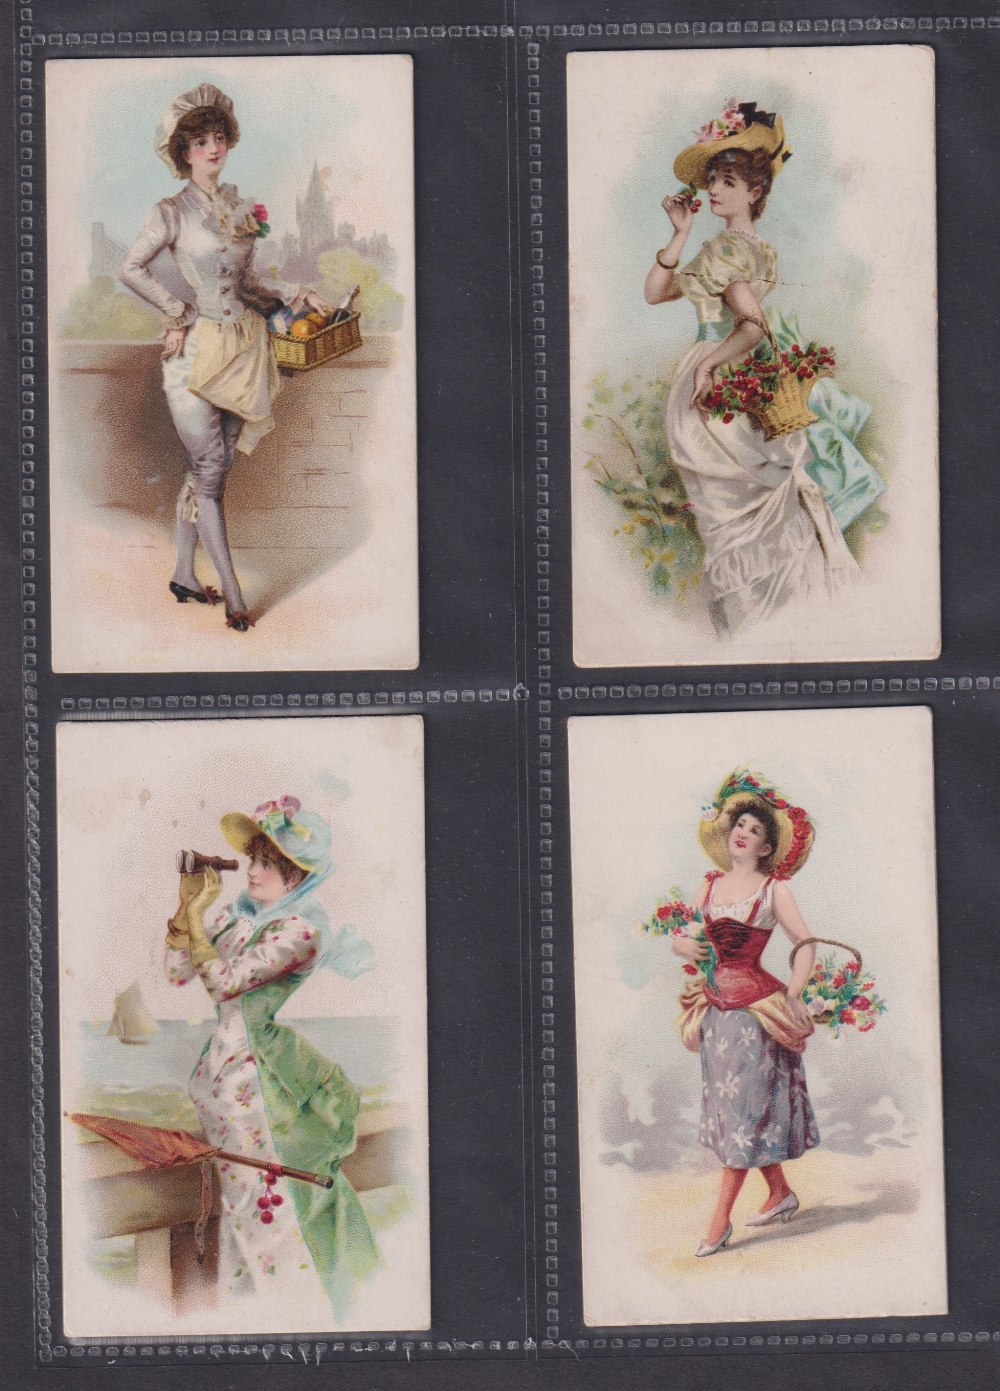 Cigarette cards, USA, Duke's, French Novelties, 'X' size (22/25) ref N110, missing pictures nos 9,